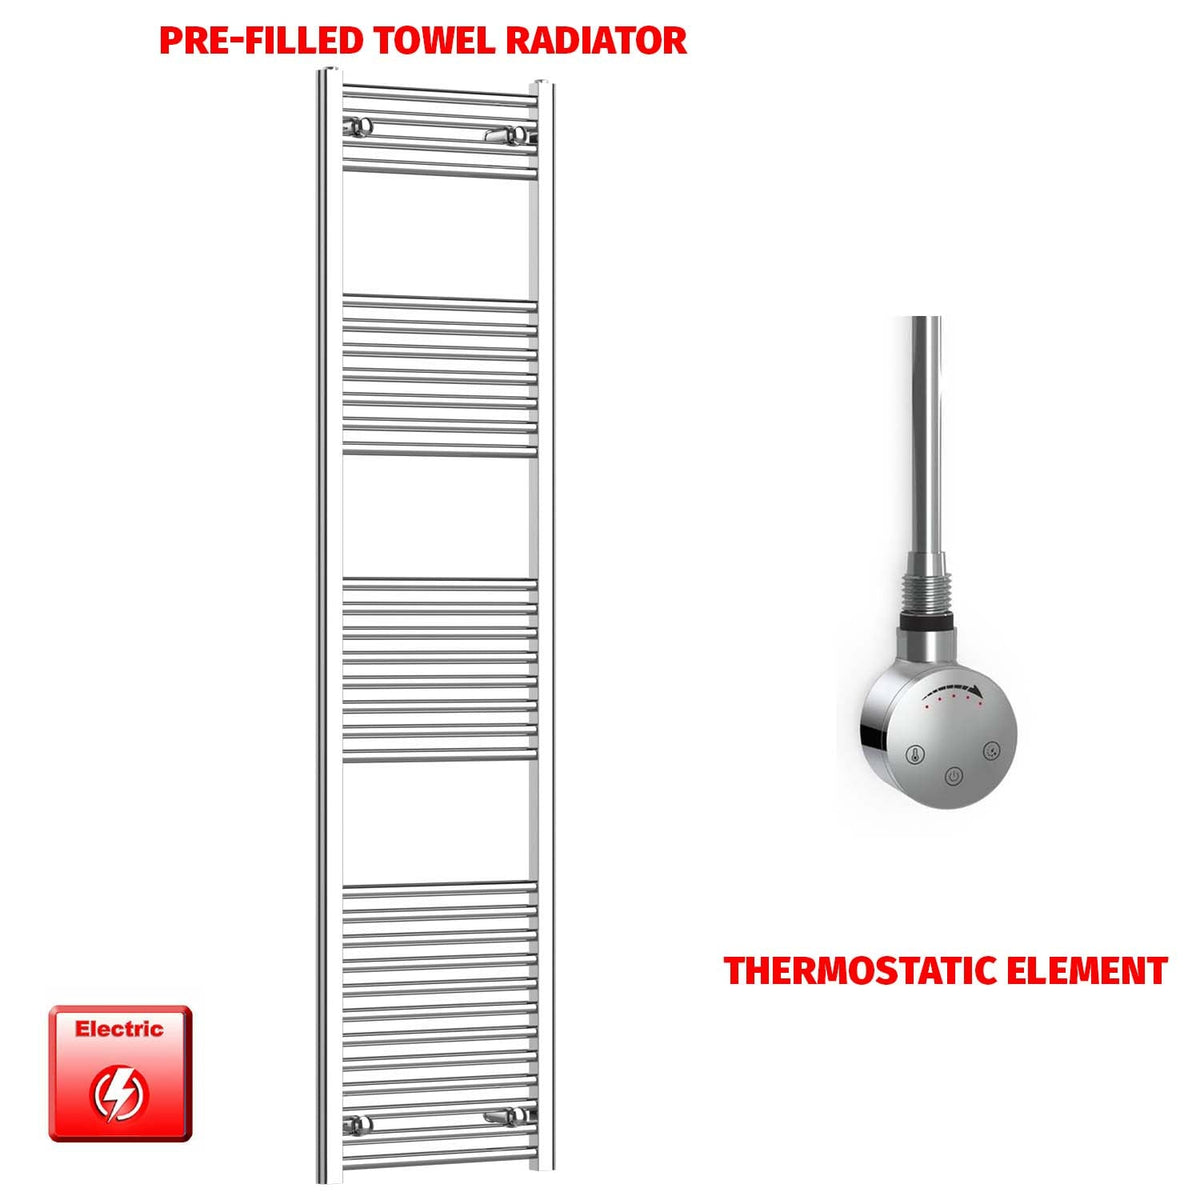 1800mm High 450mm Wide Pre-Filled Electric Heated Towel Radiator Straight Chrome